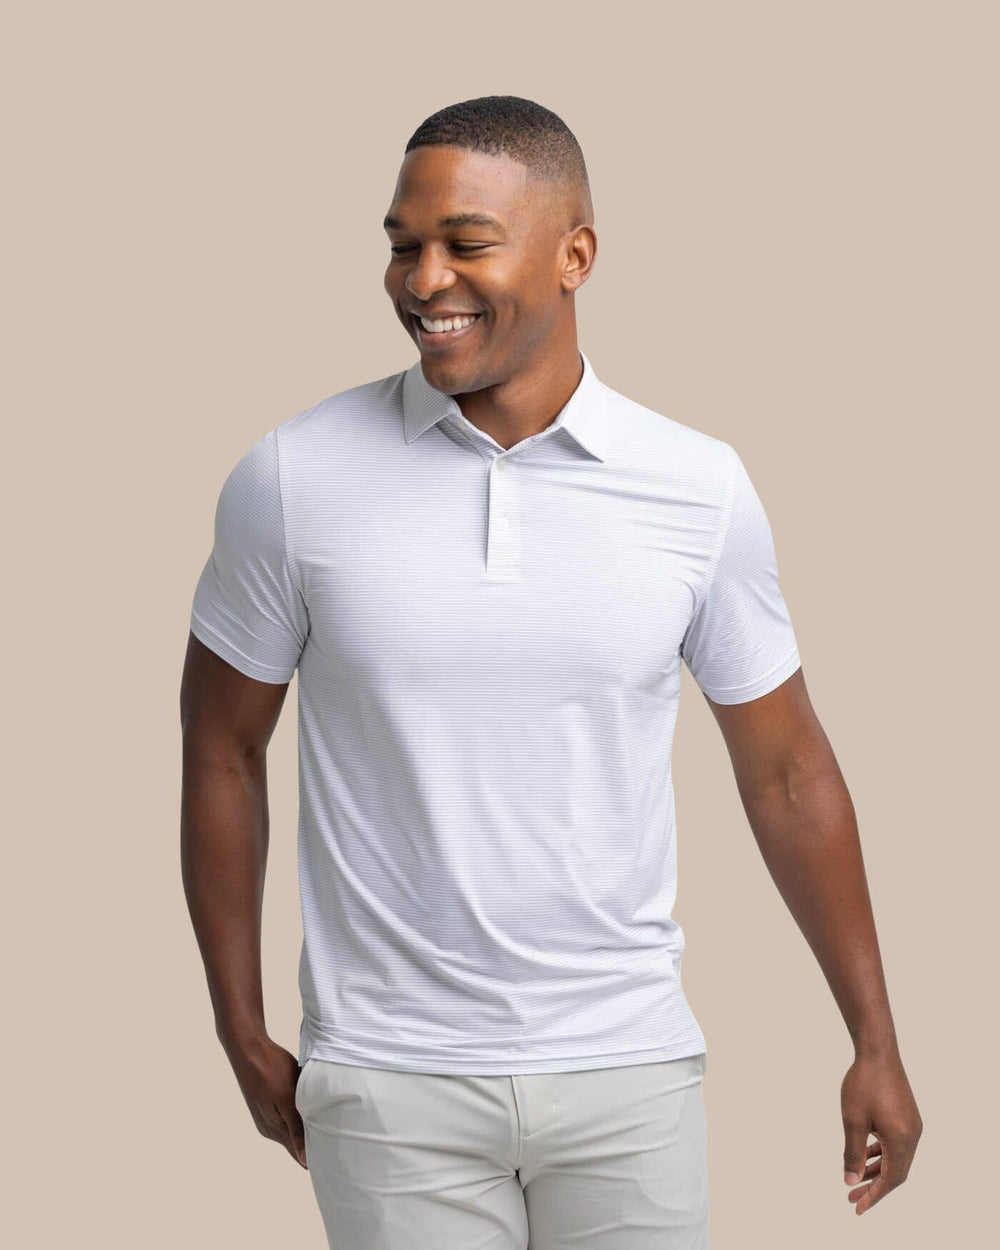 The front view of the Southern Tide brrr-eeze Meadowbrook Stripe Polo by Southern Tide - Platinum Grey